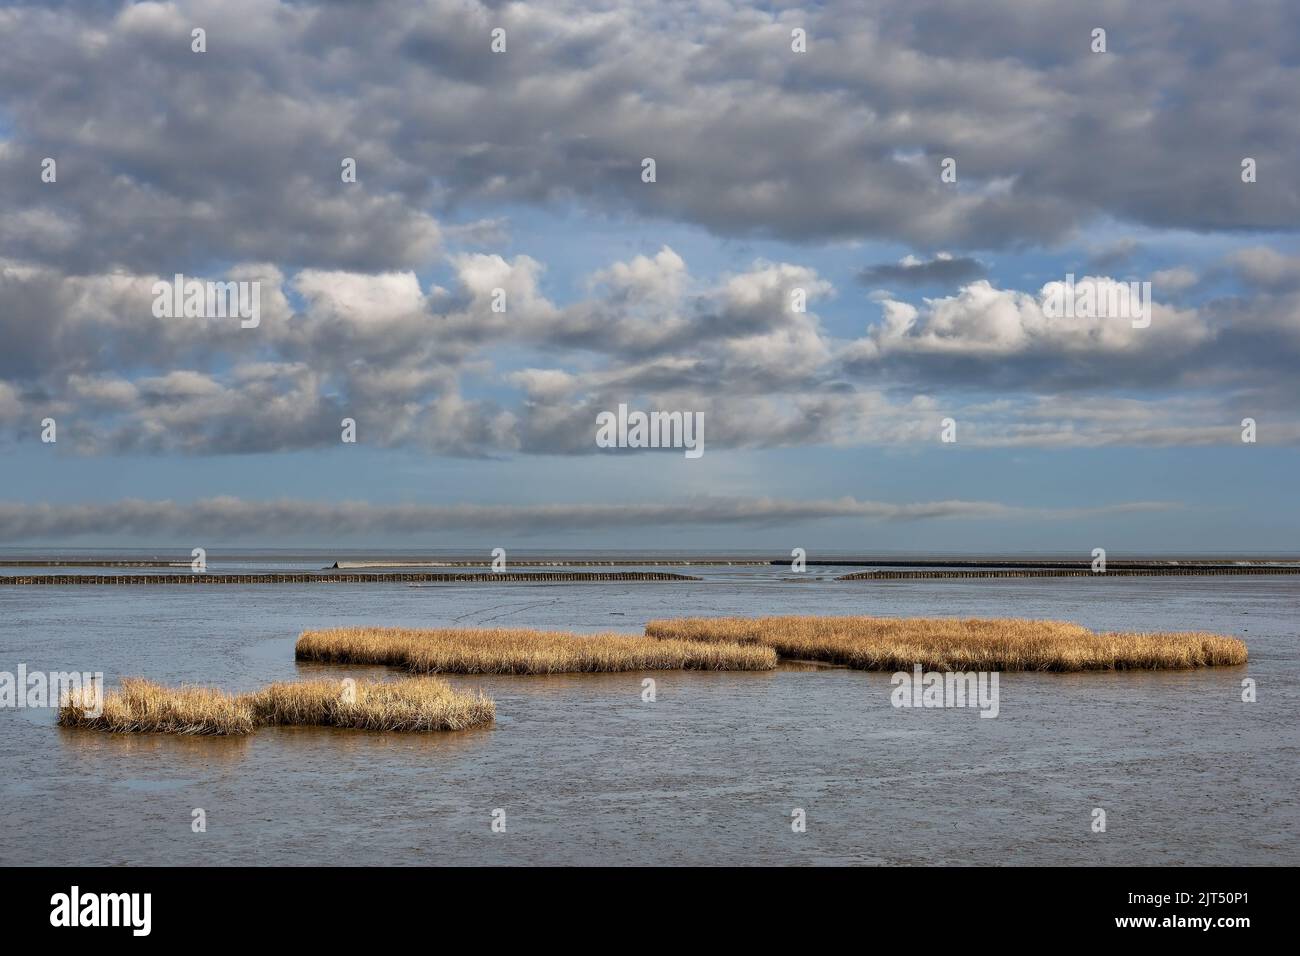 Coastal Landscape in Wattenmeer National Park,North Sea,Germany Stock Photo